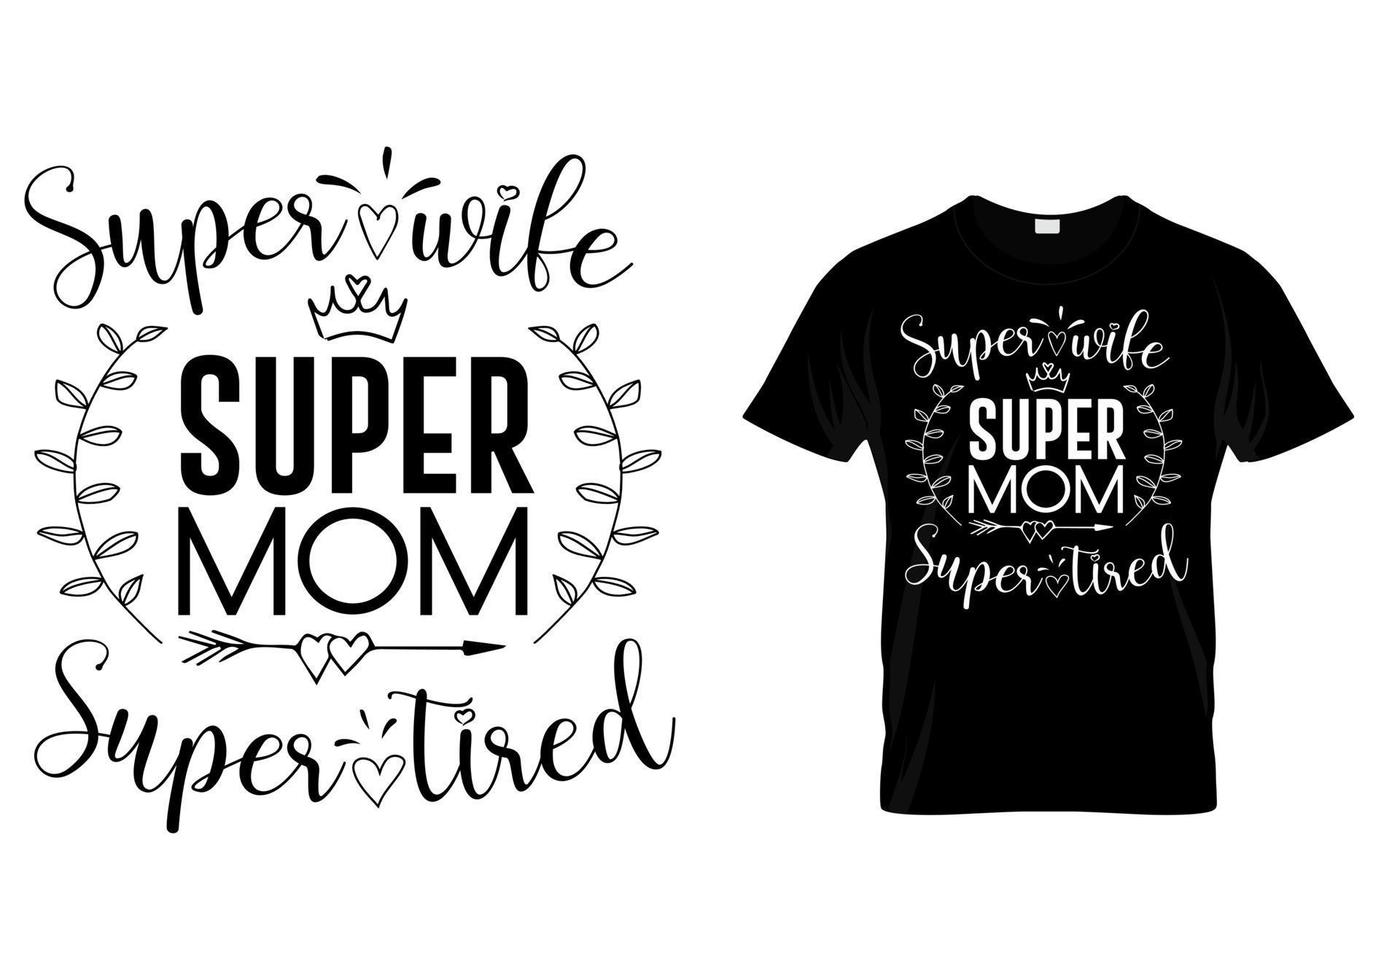 Super mom super wife super tired typography t shirt design vector